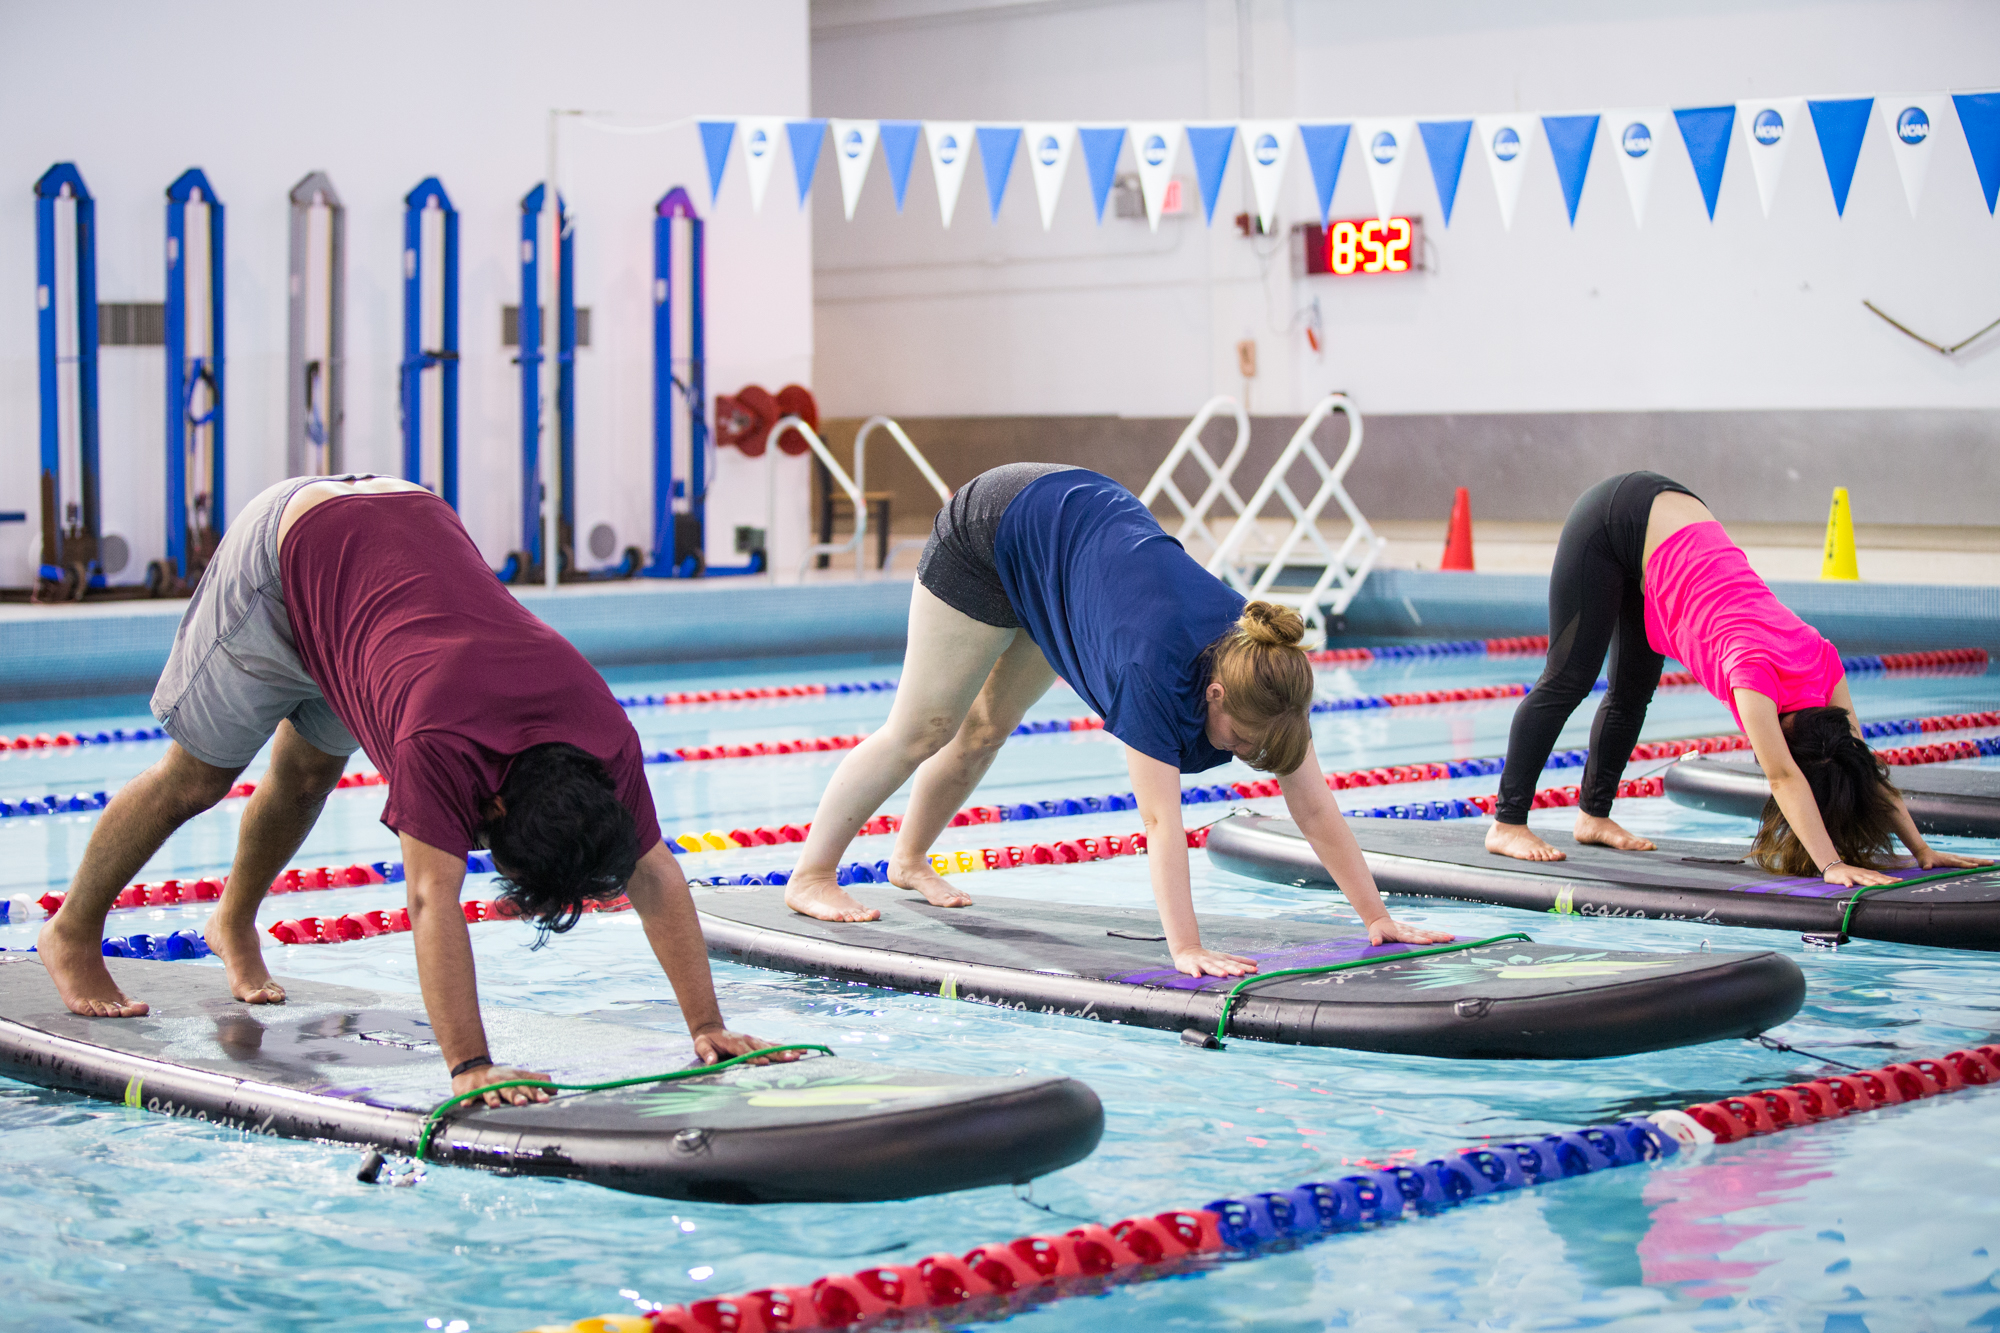 Penn Campus Recreation offered a free floating yoga class as part of its Spring into Wellness Week.